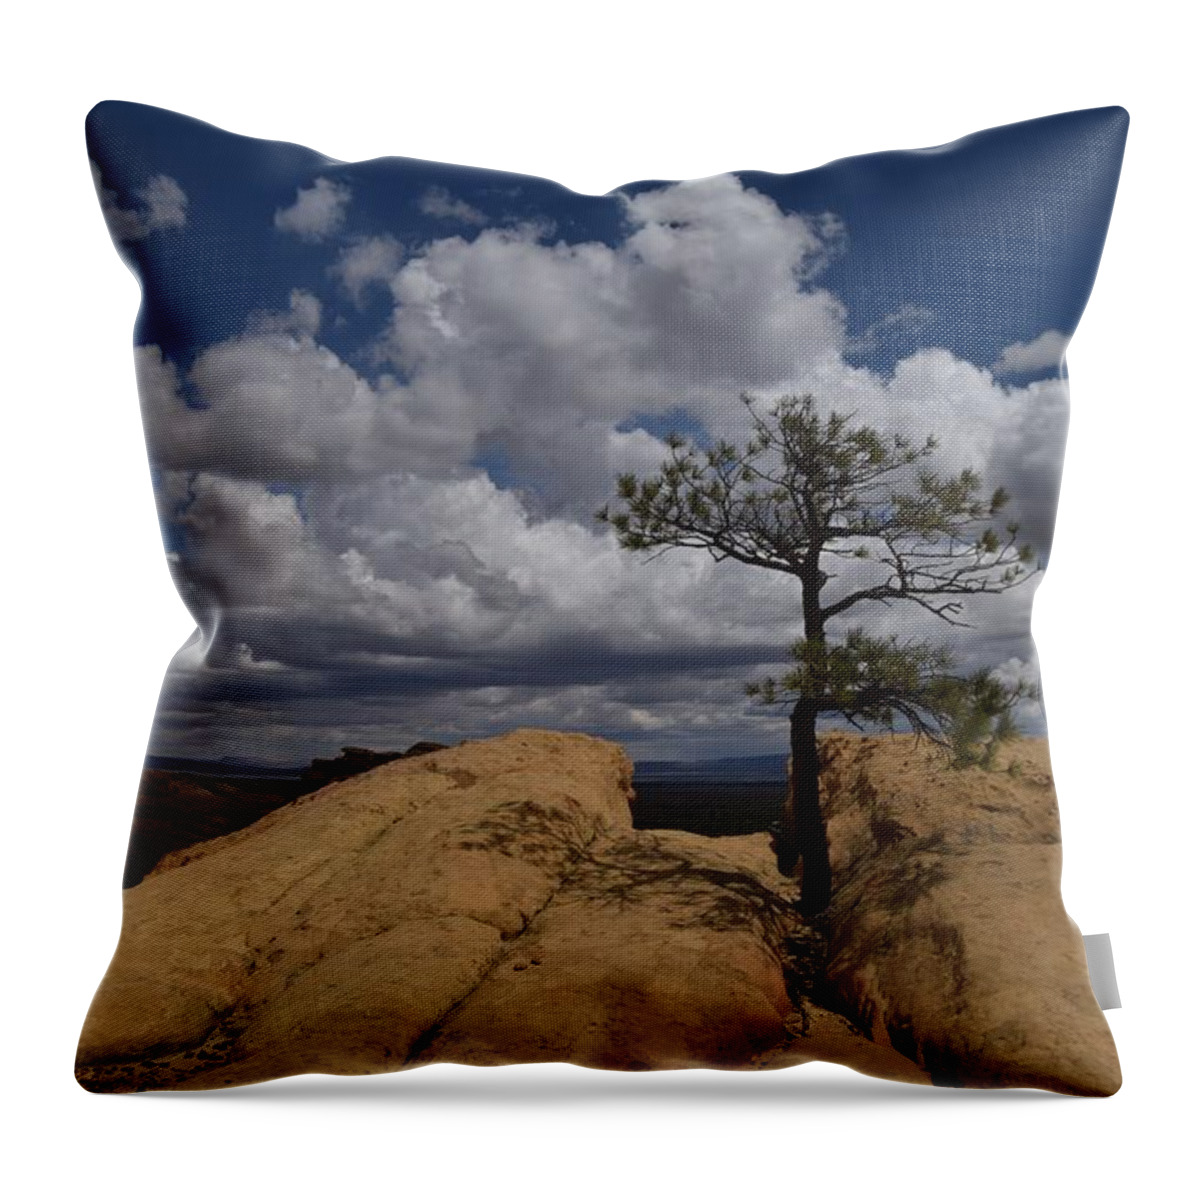 El Malpais Throw Pillow featuring the photograph Lonesome by Jim Bennight